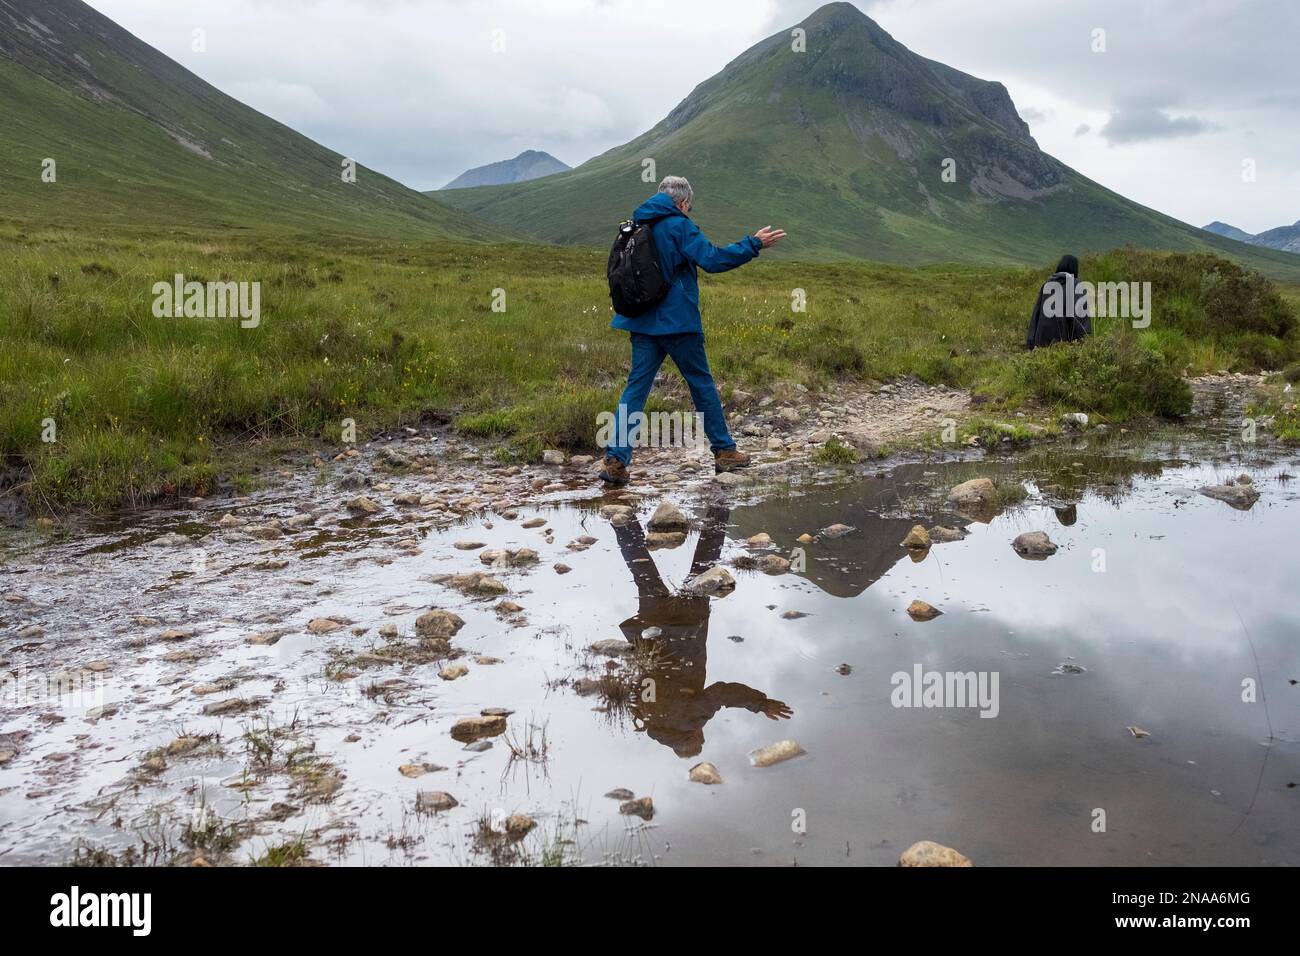 A hiker traverses a small stream along a trail in the Cuillin Mountains, Sligachan, Isle of Skye, Scotland. Stock Photo